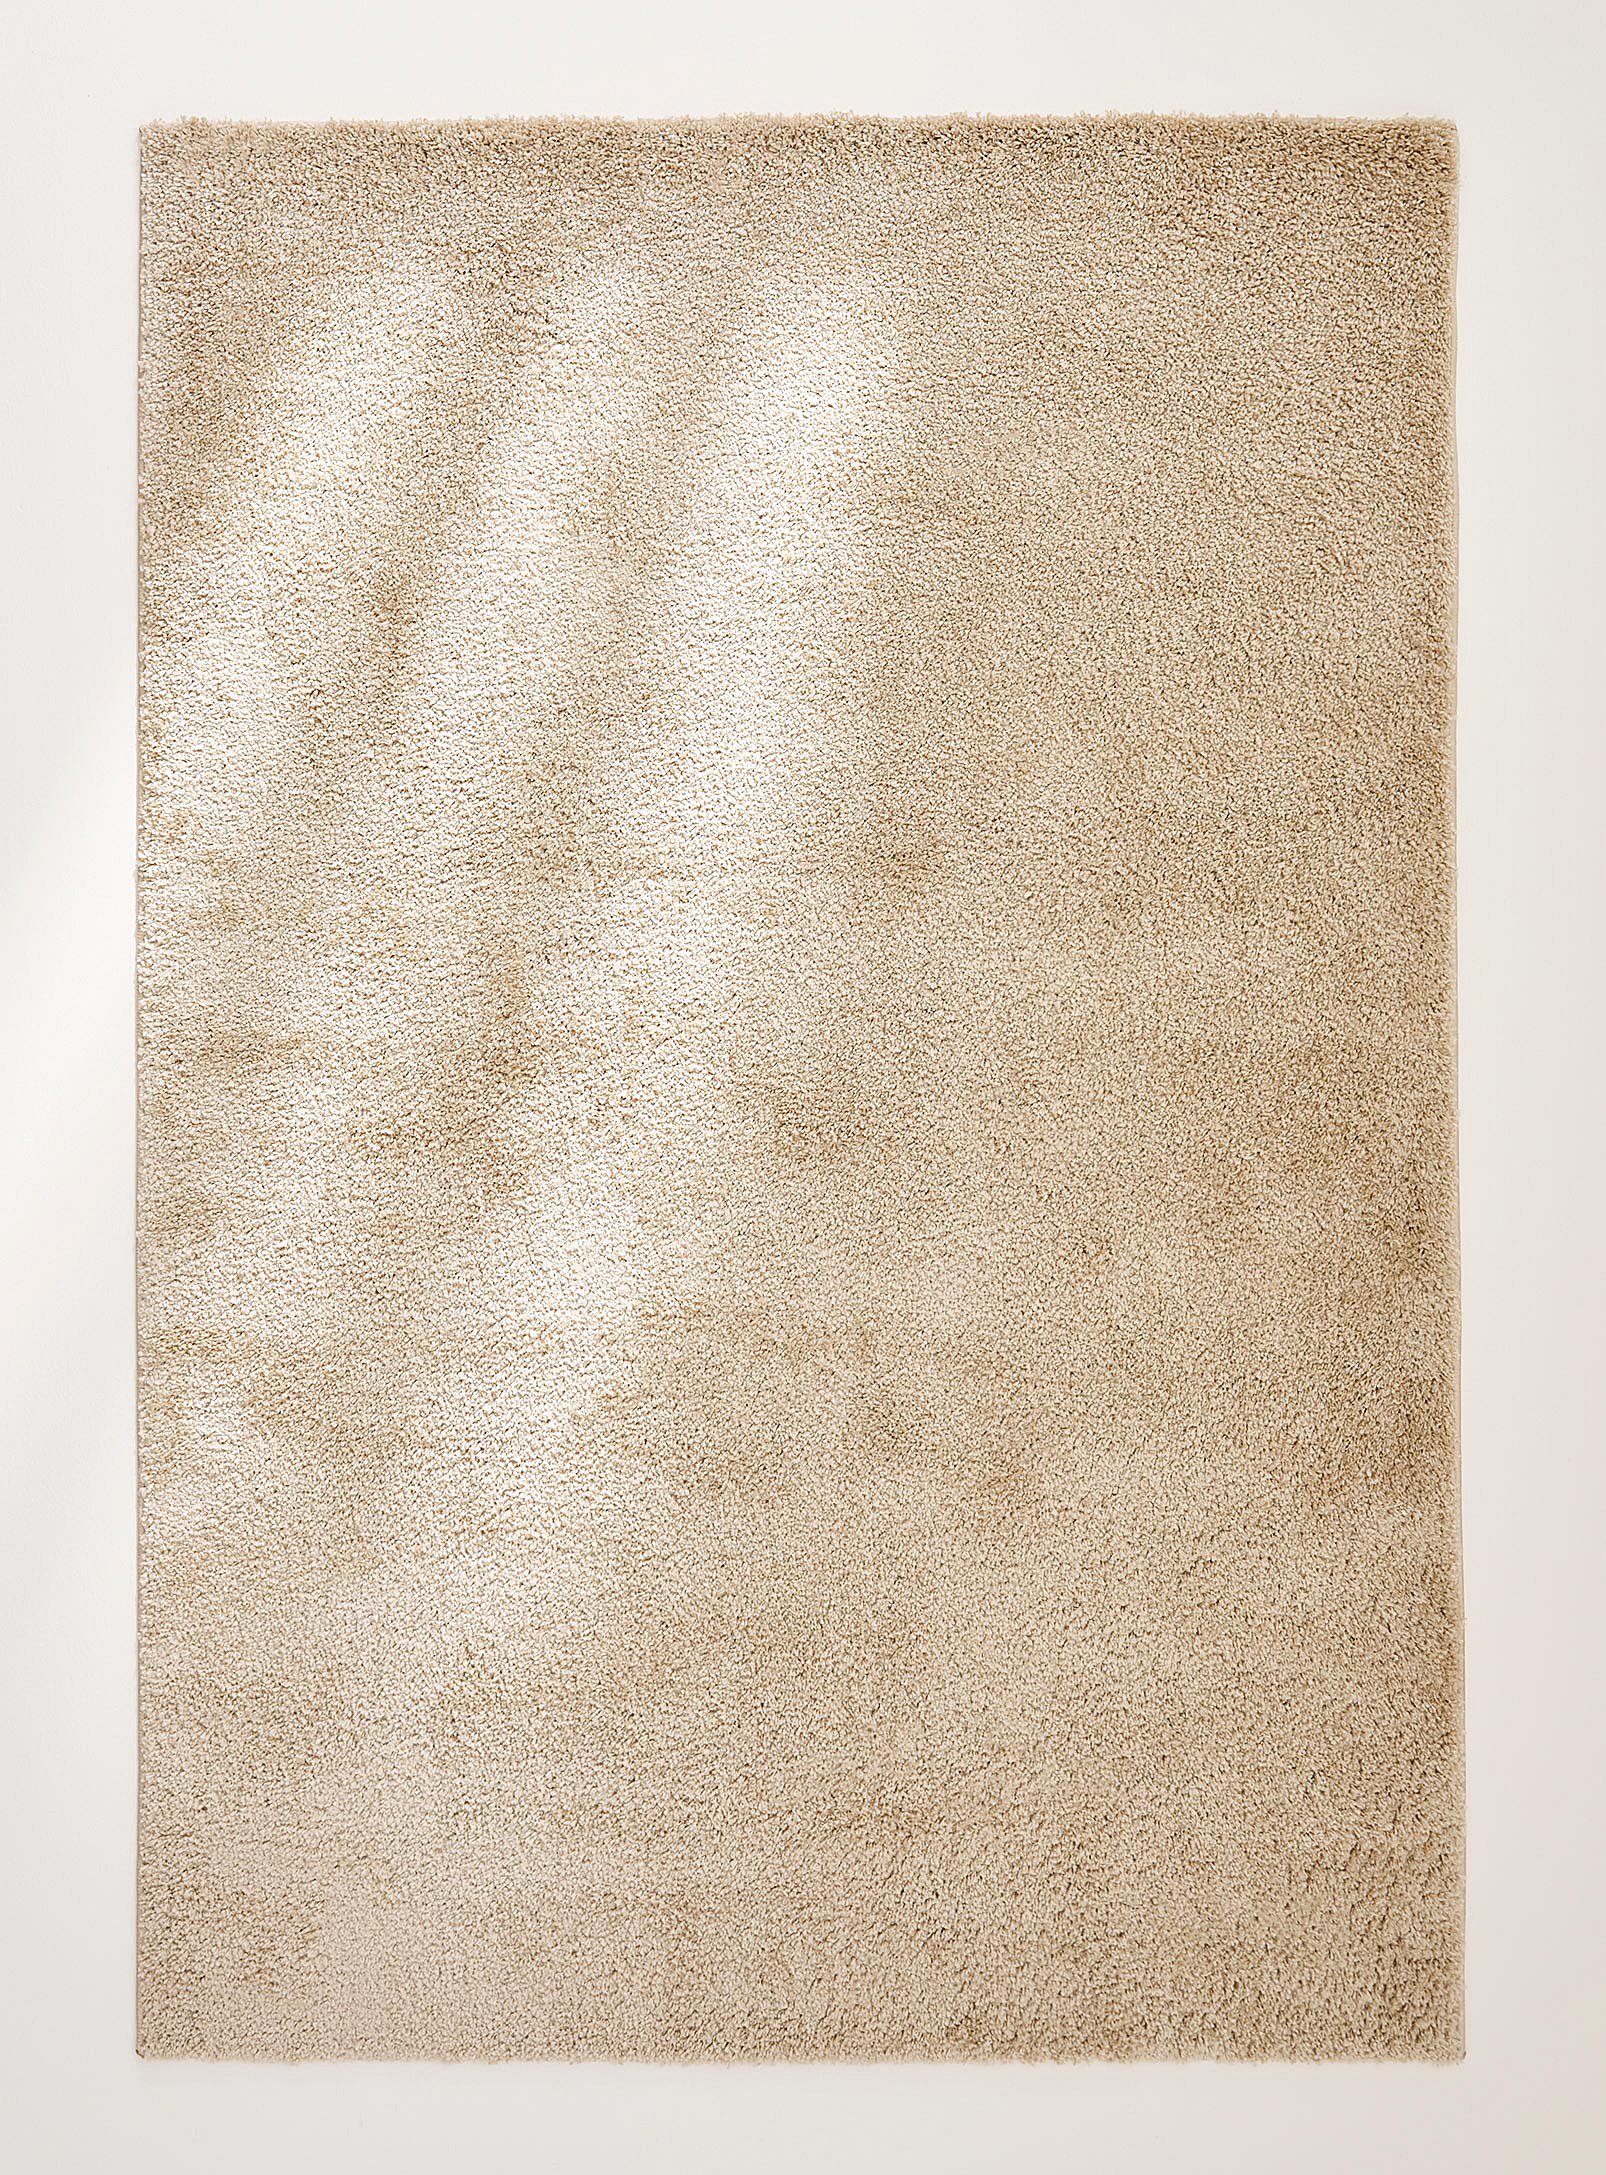 Simons Maison Nature's Essence Shag Rug See Available Sizes In Cream Beige